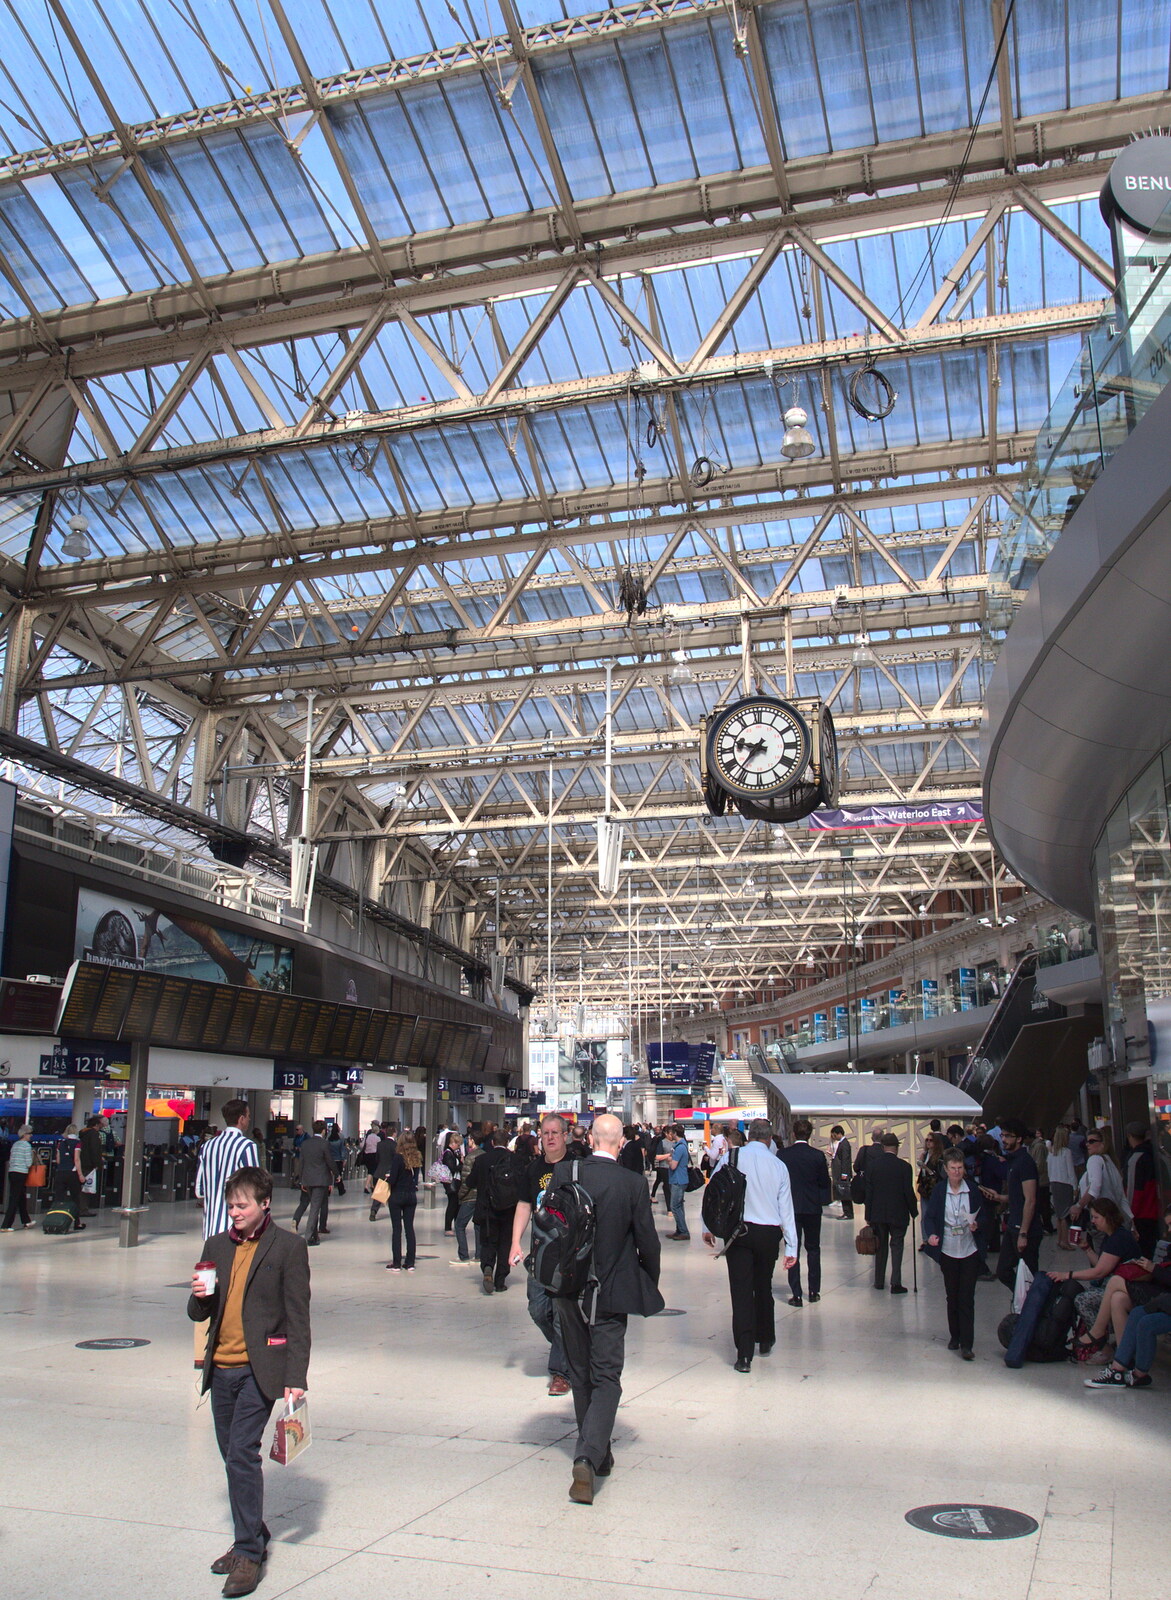 The Waterloo station clock from SwiftKey Does AirSoft, Epsom, Surrey - 11th June 2015